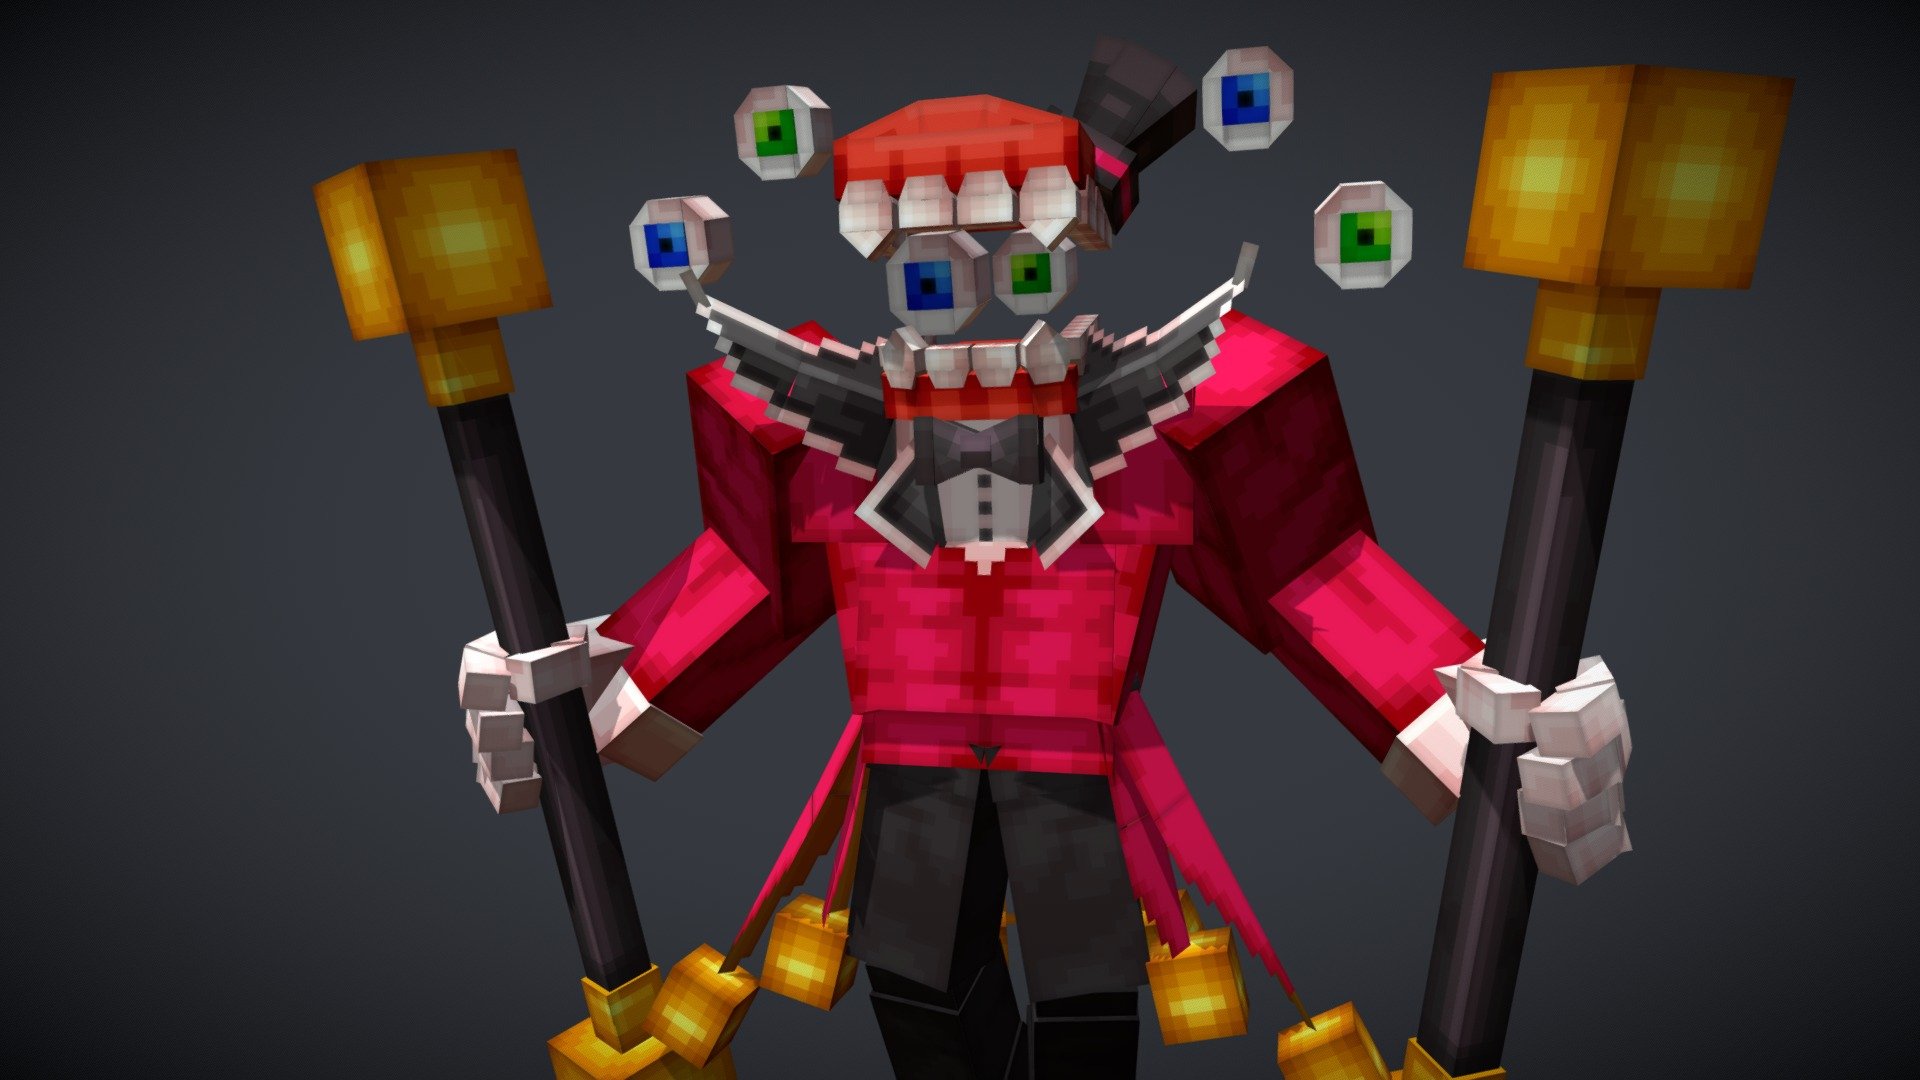 Creative Artificial Intelligence Networking Entity (abbreviated as Caine), is the main antagonist of The Amazing Digital Circus. He is an AI that portrays himself as the ringmaster of the circus, maintaining the simulation and its residents 3d model